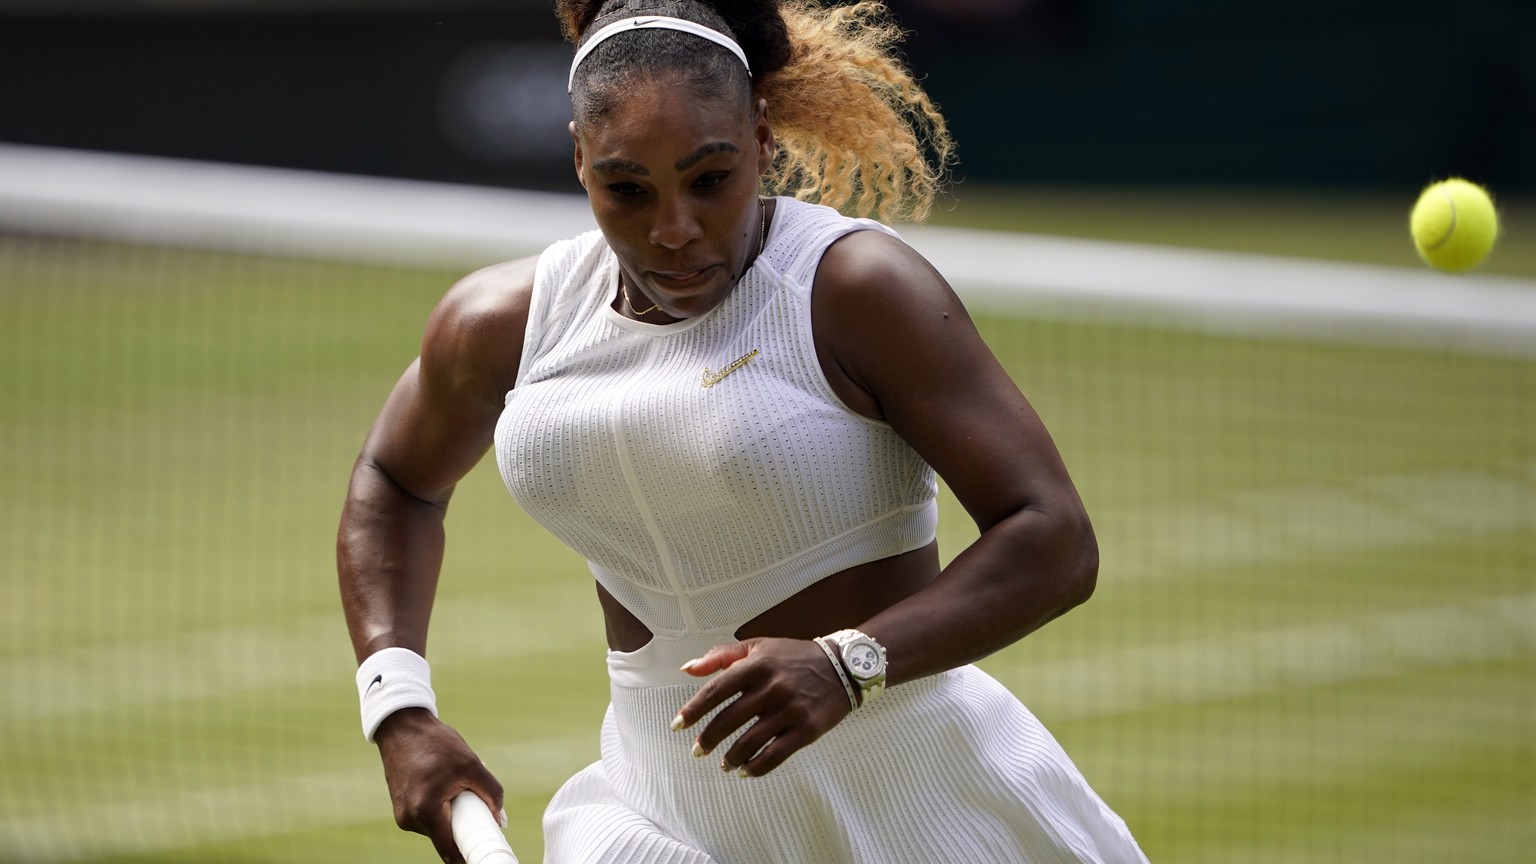 epa07710277 Serena Williams of the US in action against Barbora Strycova of the Czech Republic in their semi final match during the Wimbledon Championships at the All England Lawn Tennis Club, in Lond ...